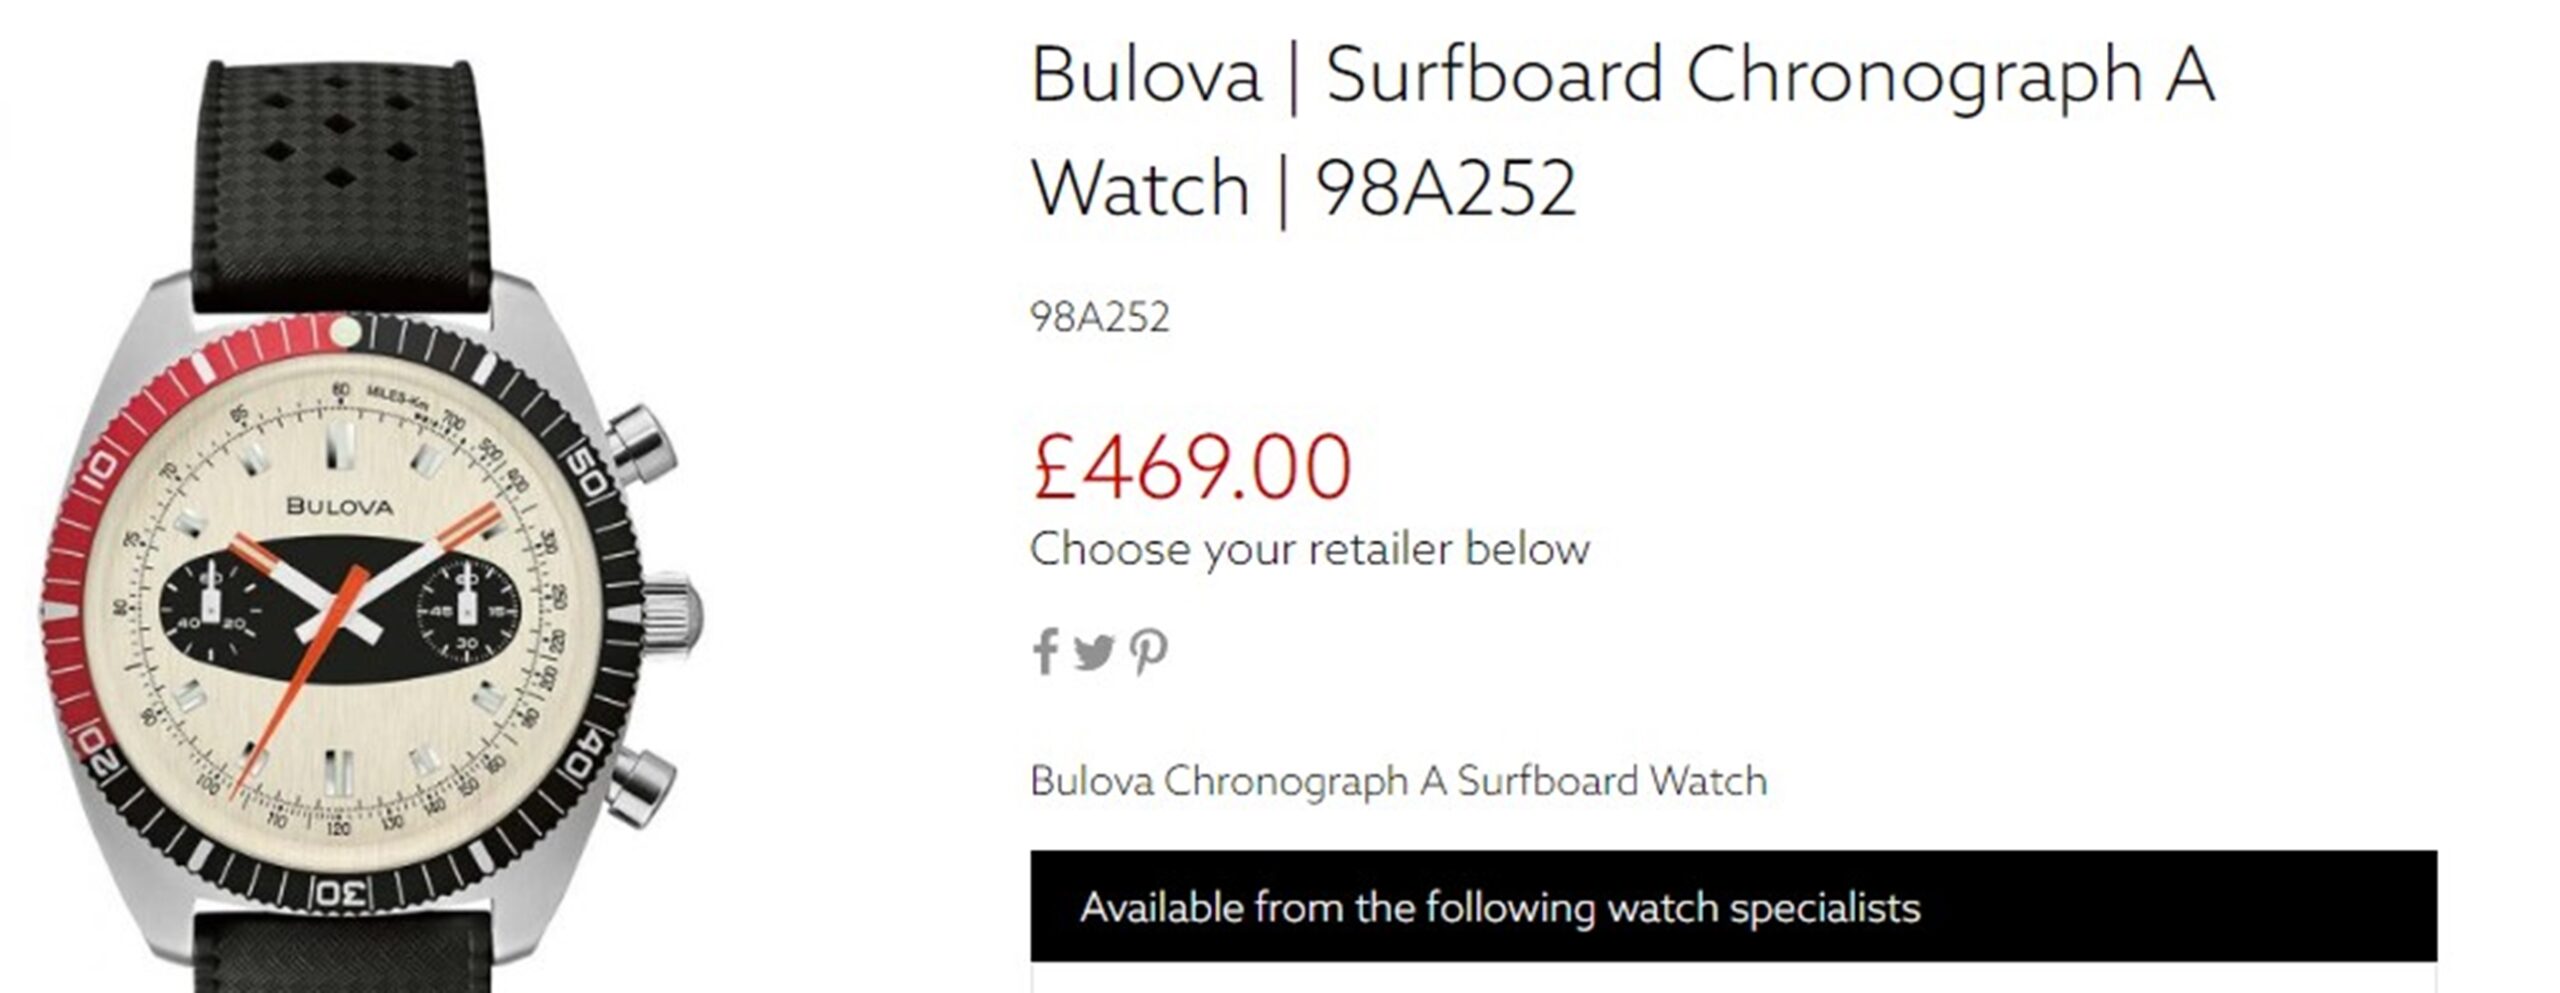 Bulova Archive Series Surfboard Chronograph Watch - Image 8 of 8